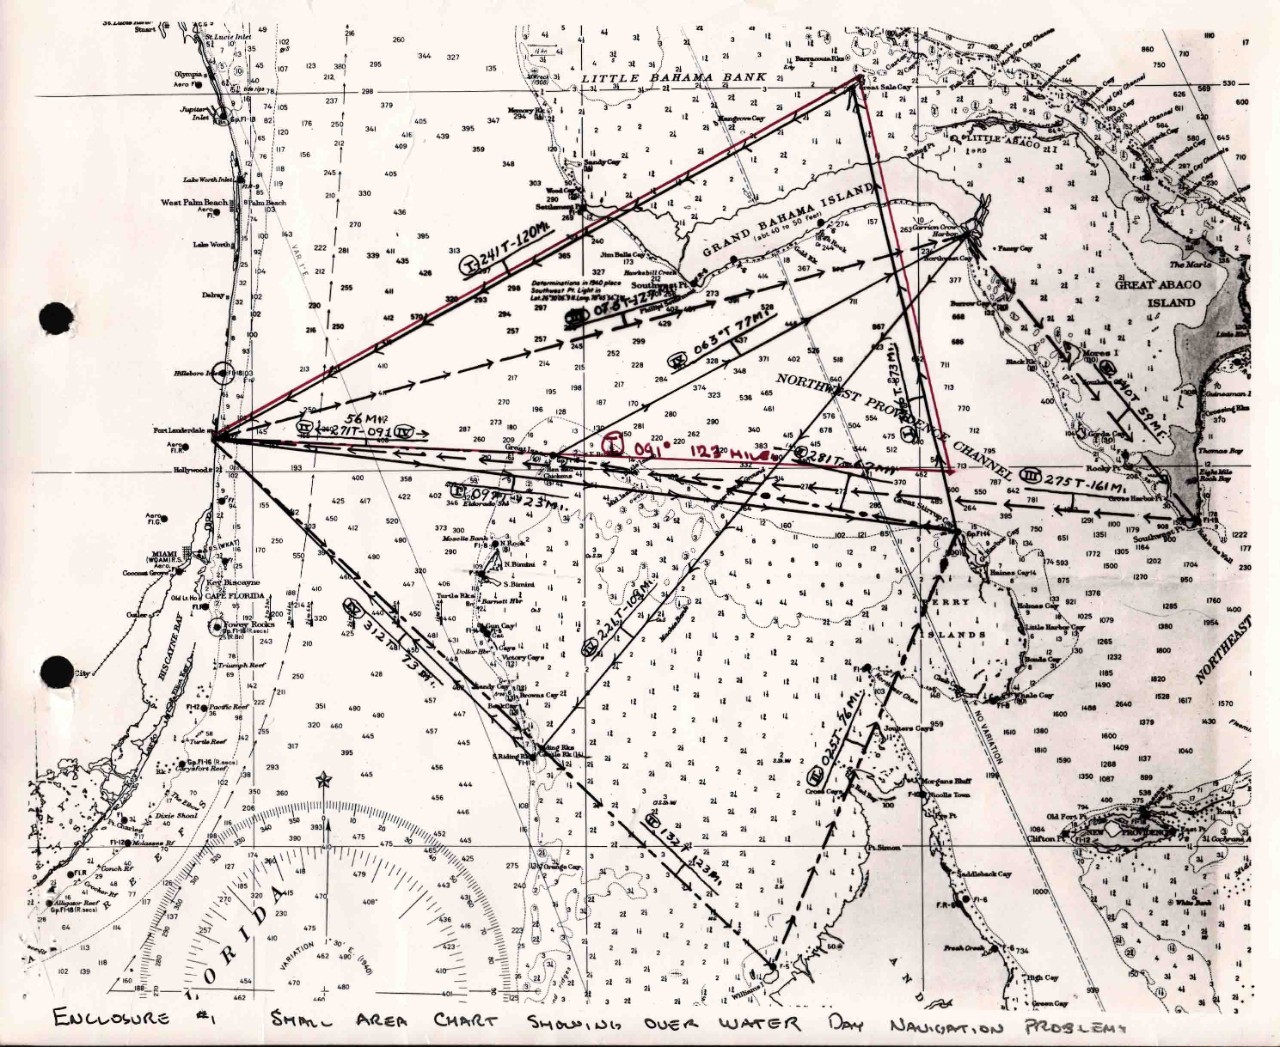 Map of Navigation Problem No. 1 for Flight 19. Flight 19 was a flight of five Navy Avenger aircraft lost off the coast of Florida on 5 December 1945. National Archives identifier 73985447.